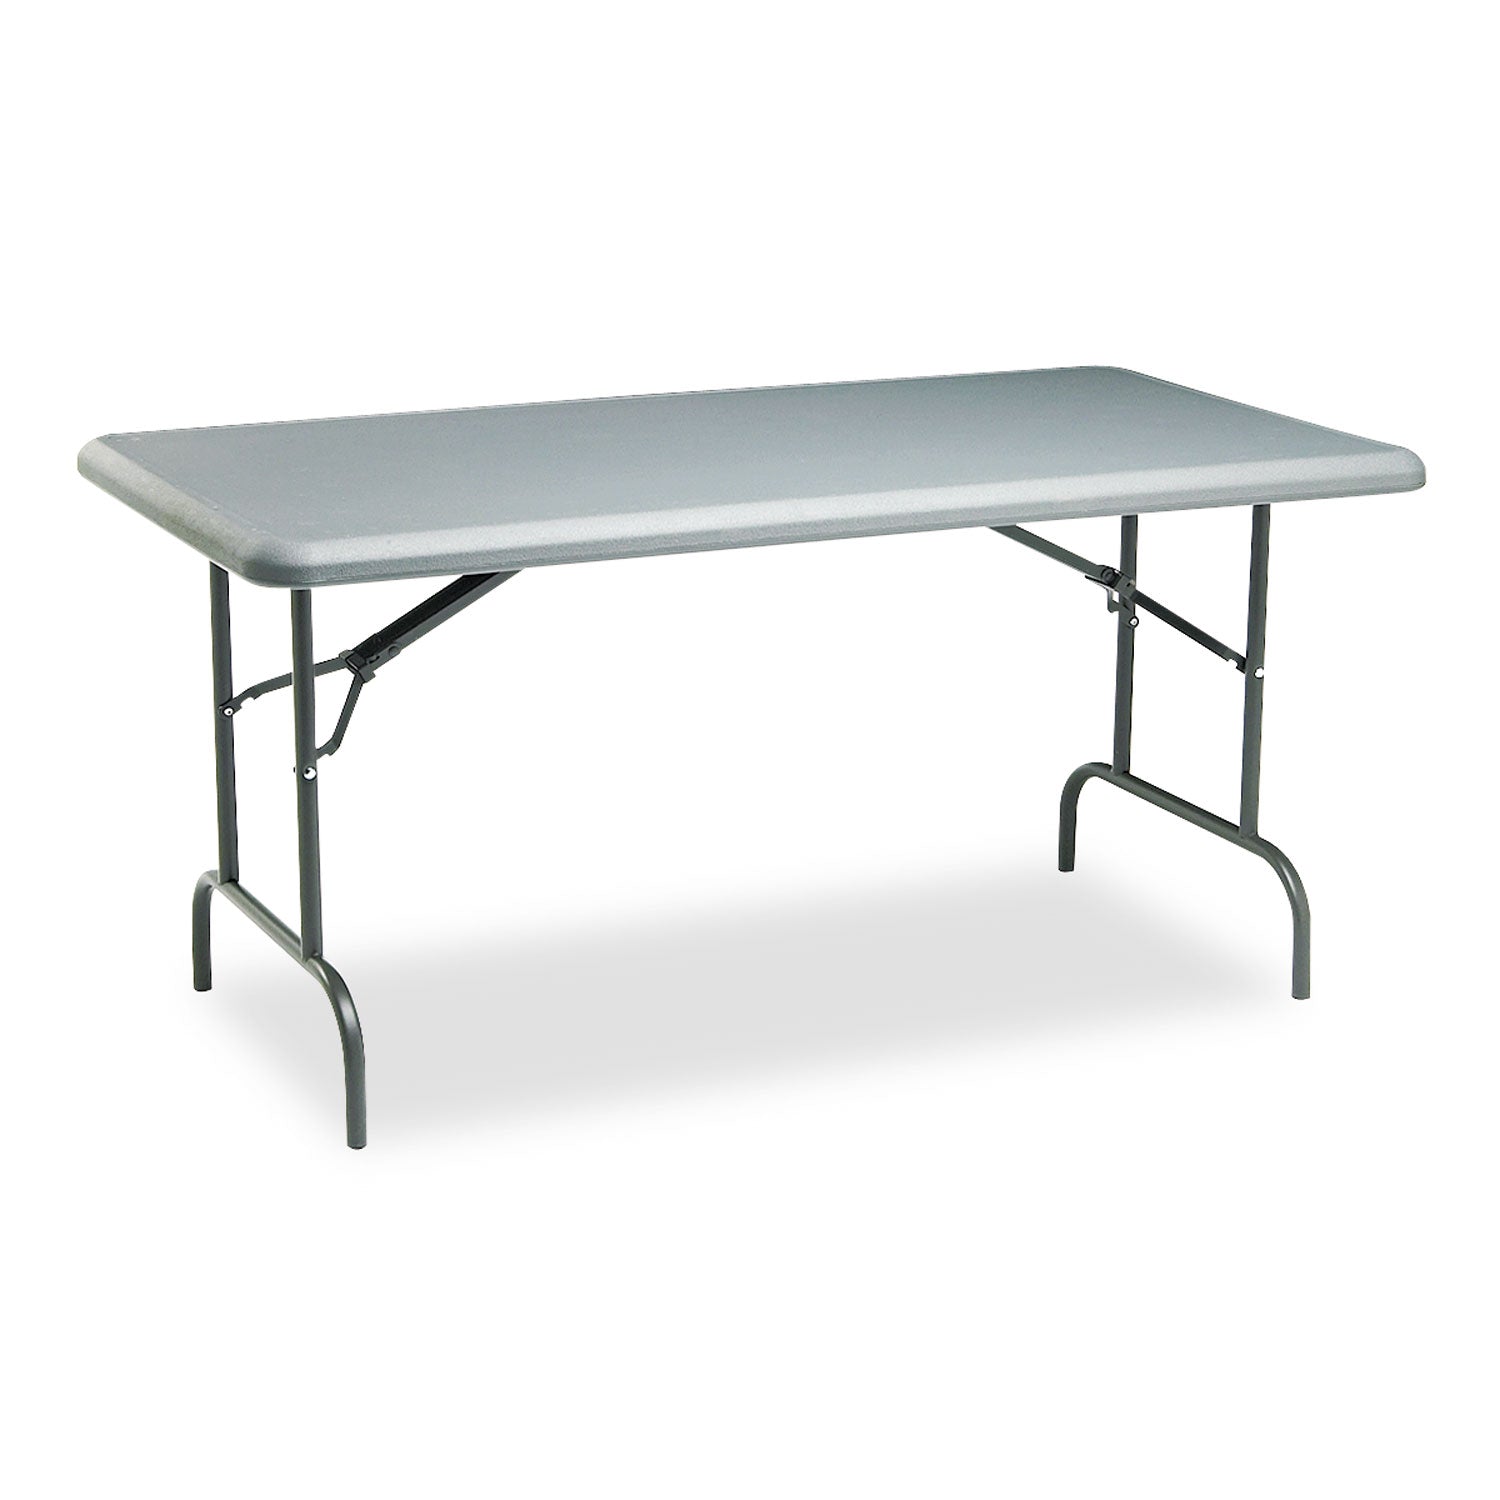 IndestrucTable Industrial Folding Table, Rectangular, 60" x 30" x 29", Charcoal - 